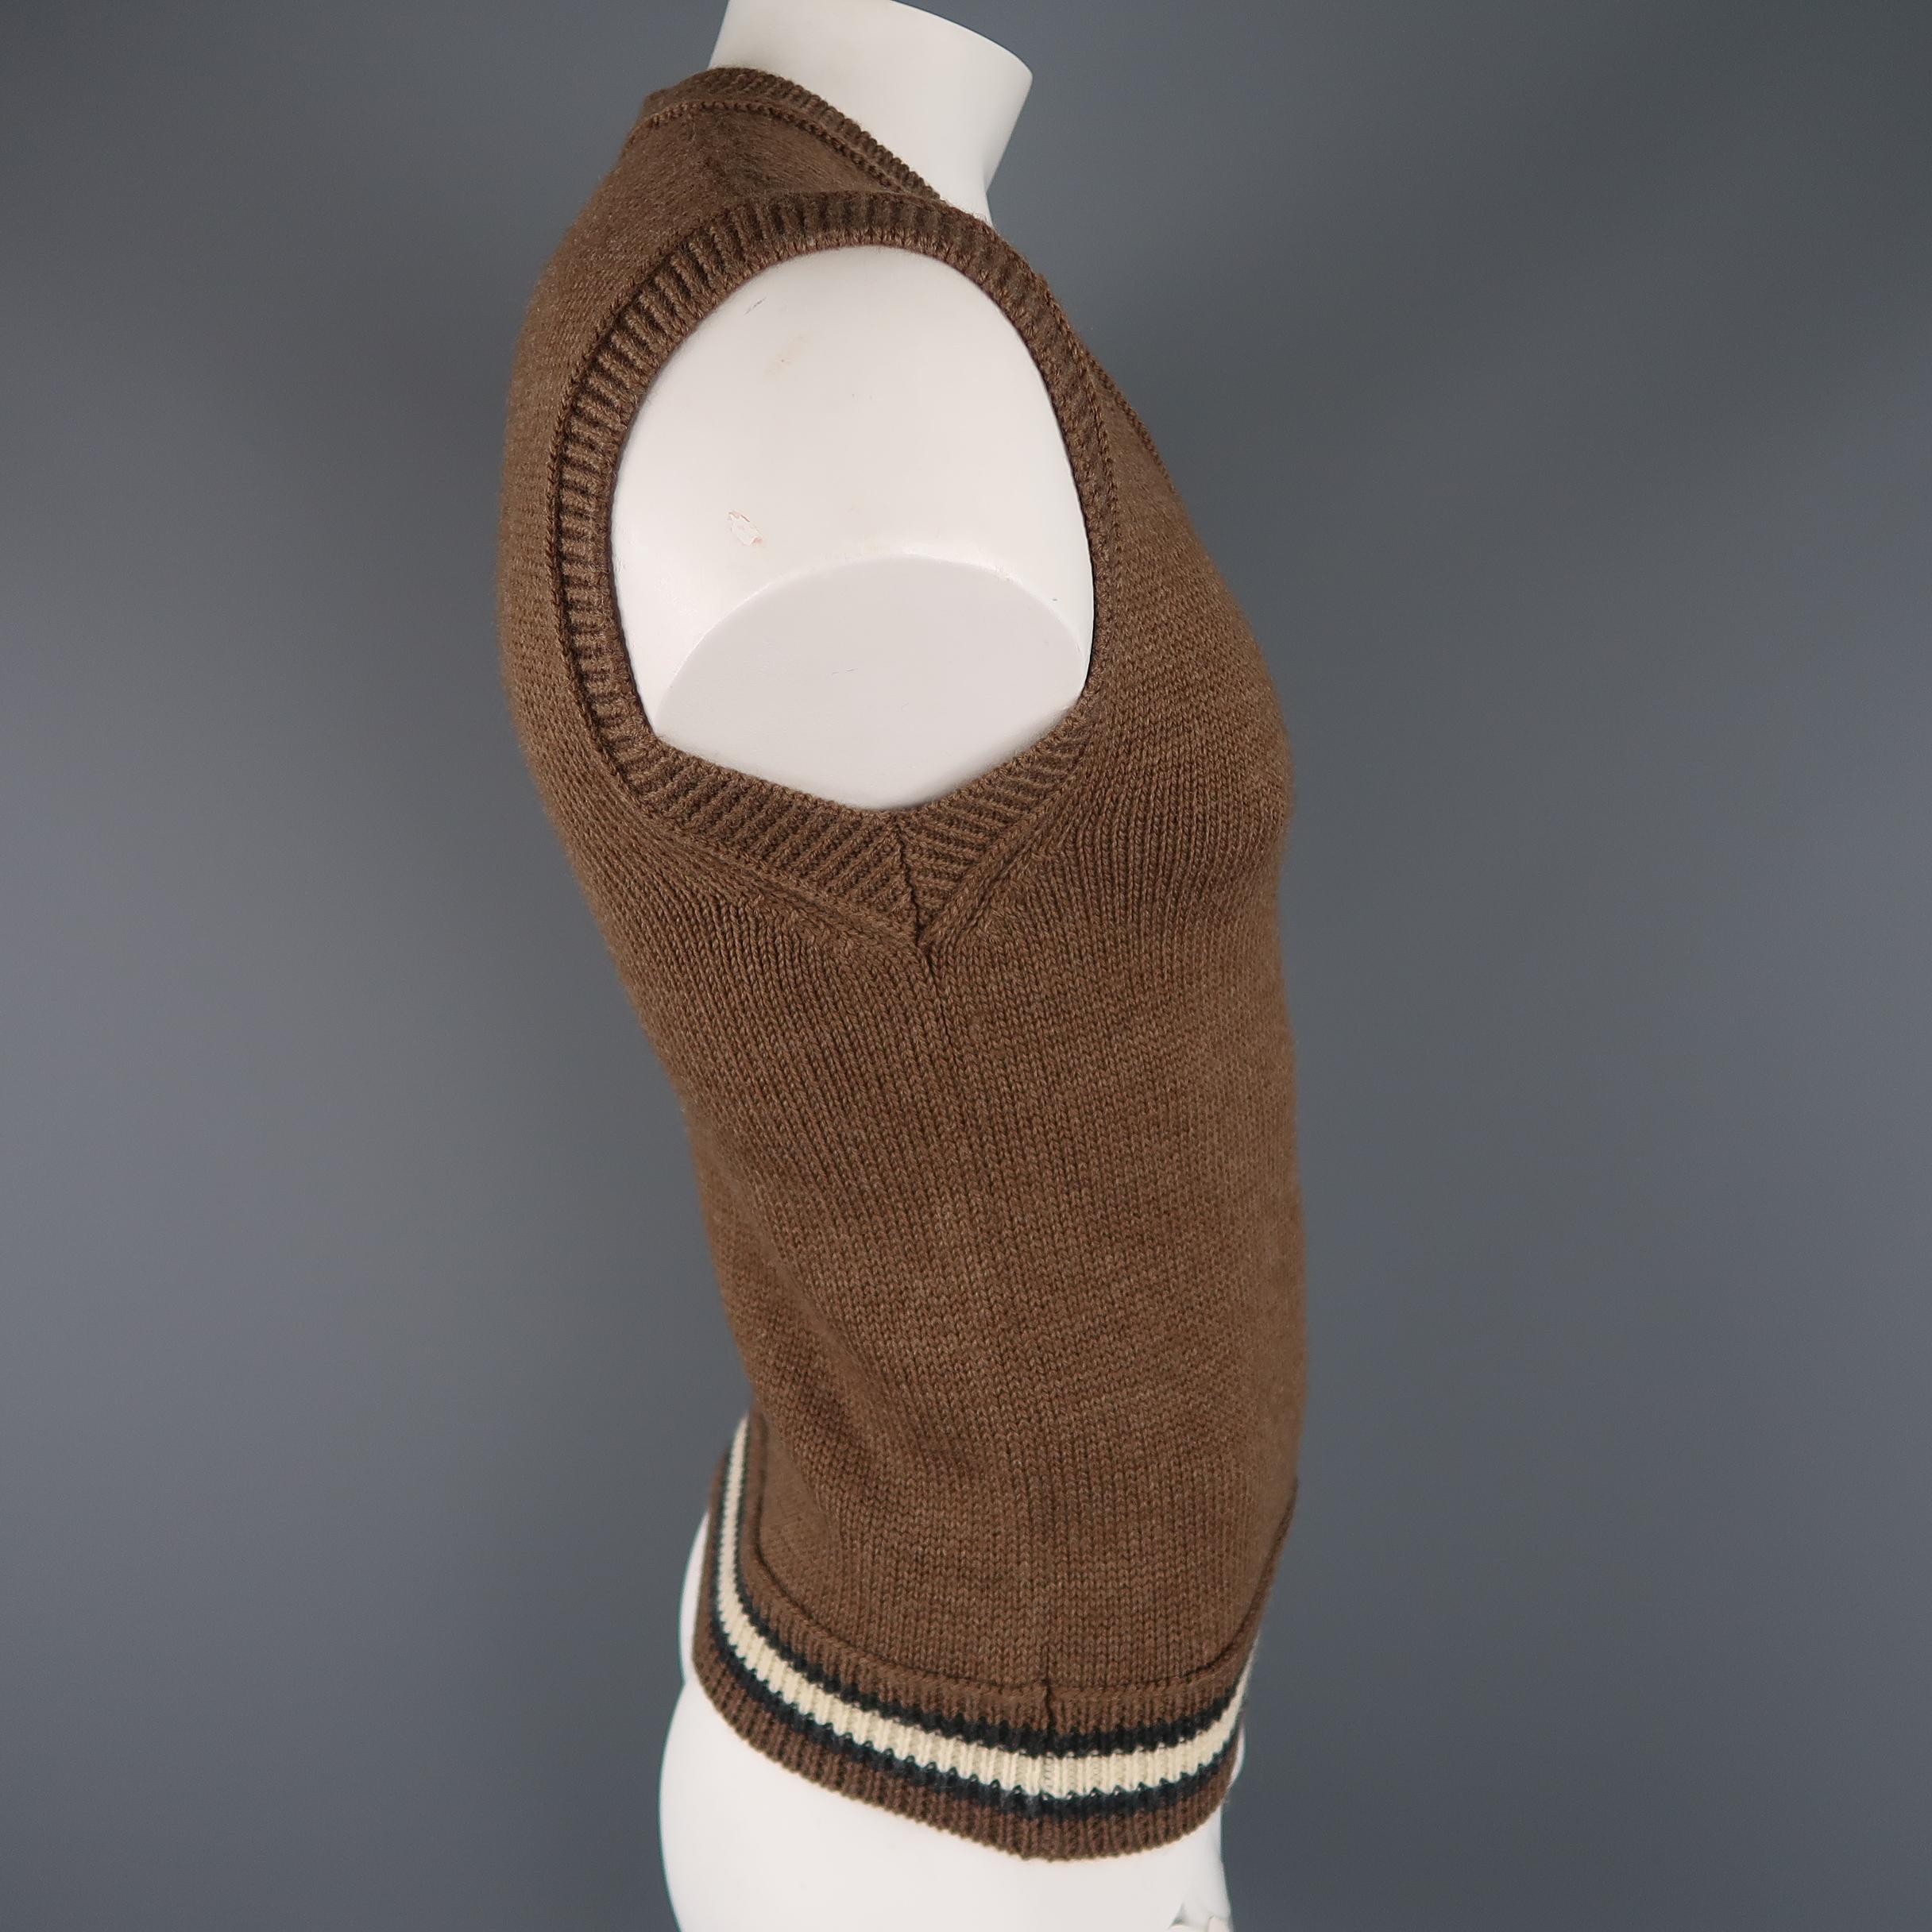 Vintage JEAN PAUL GAULTIER sweater vest comes in a taupe brown wool knit with a V neck, striped waistband, and signature back tab. Made in Italy.
 
Excellent Pre-Owned Condition.
Marked: L
 
Measurements:
 
Shoulder: 20 in.
Chest: 38 in.
Length: 25